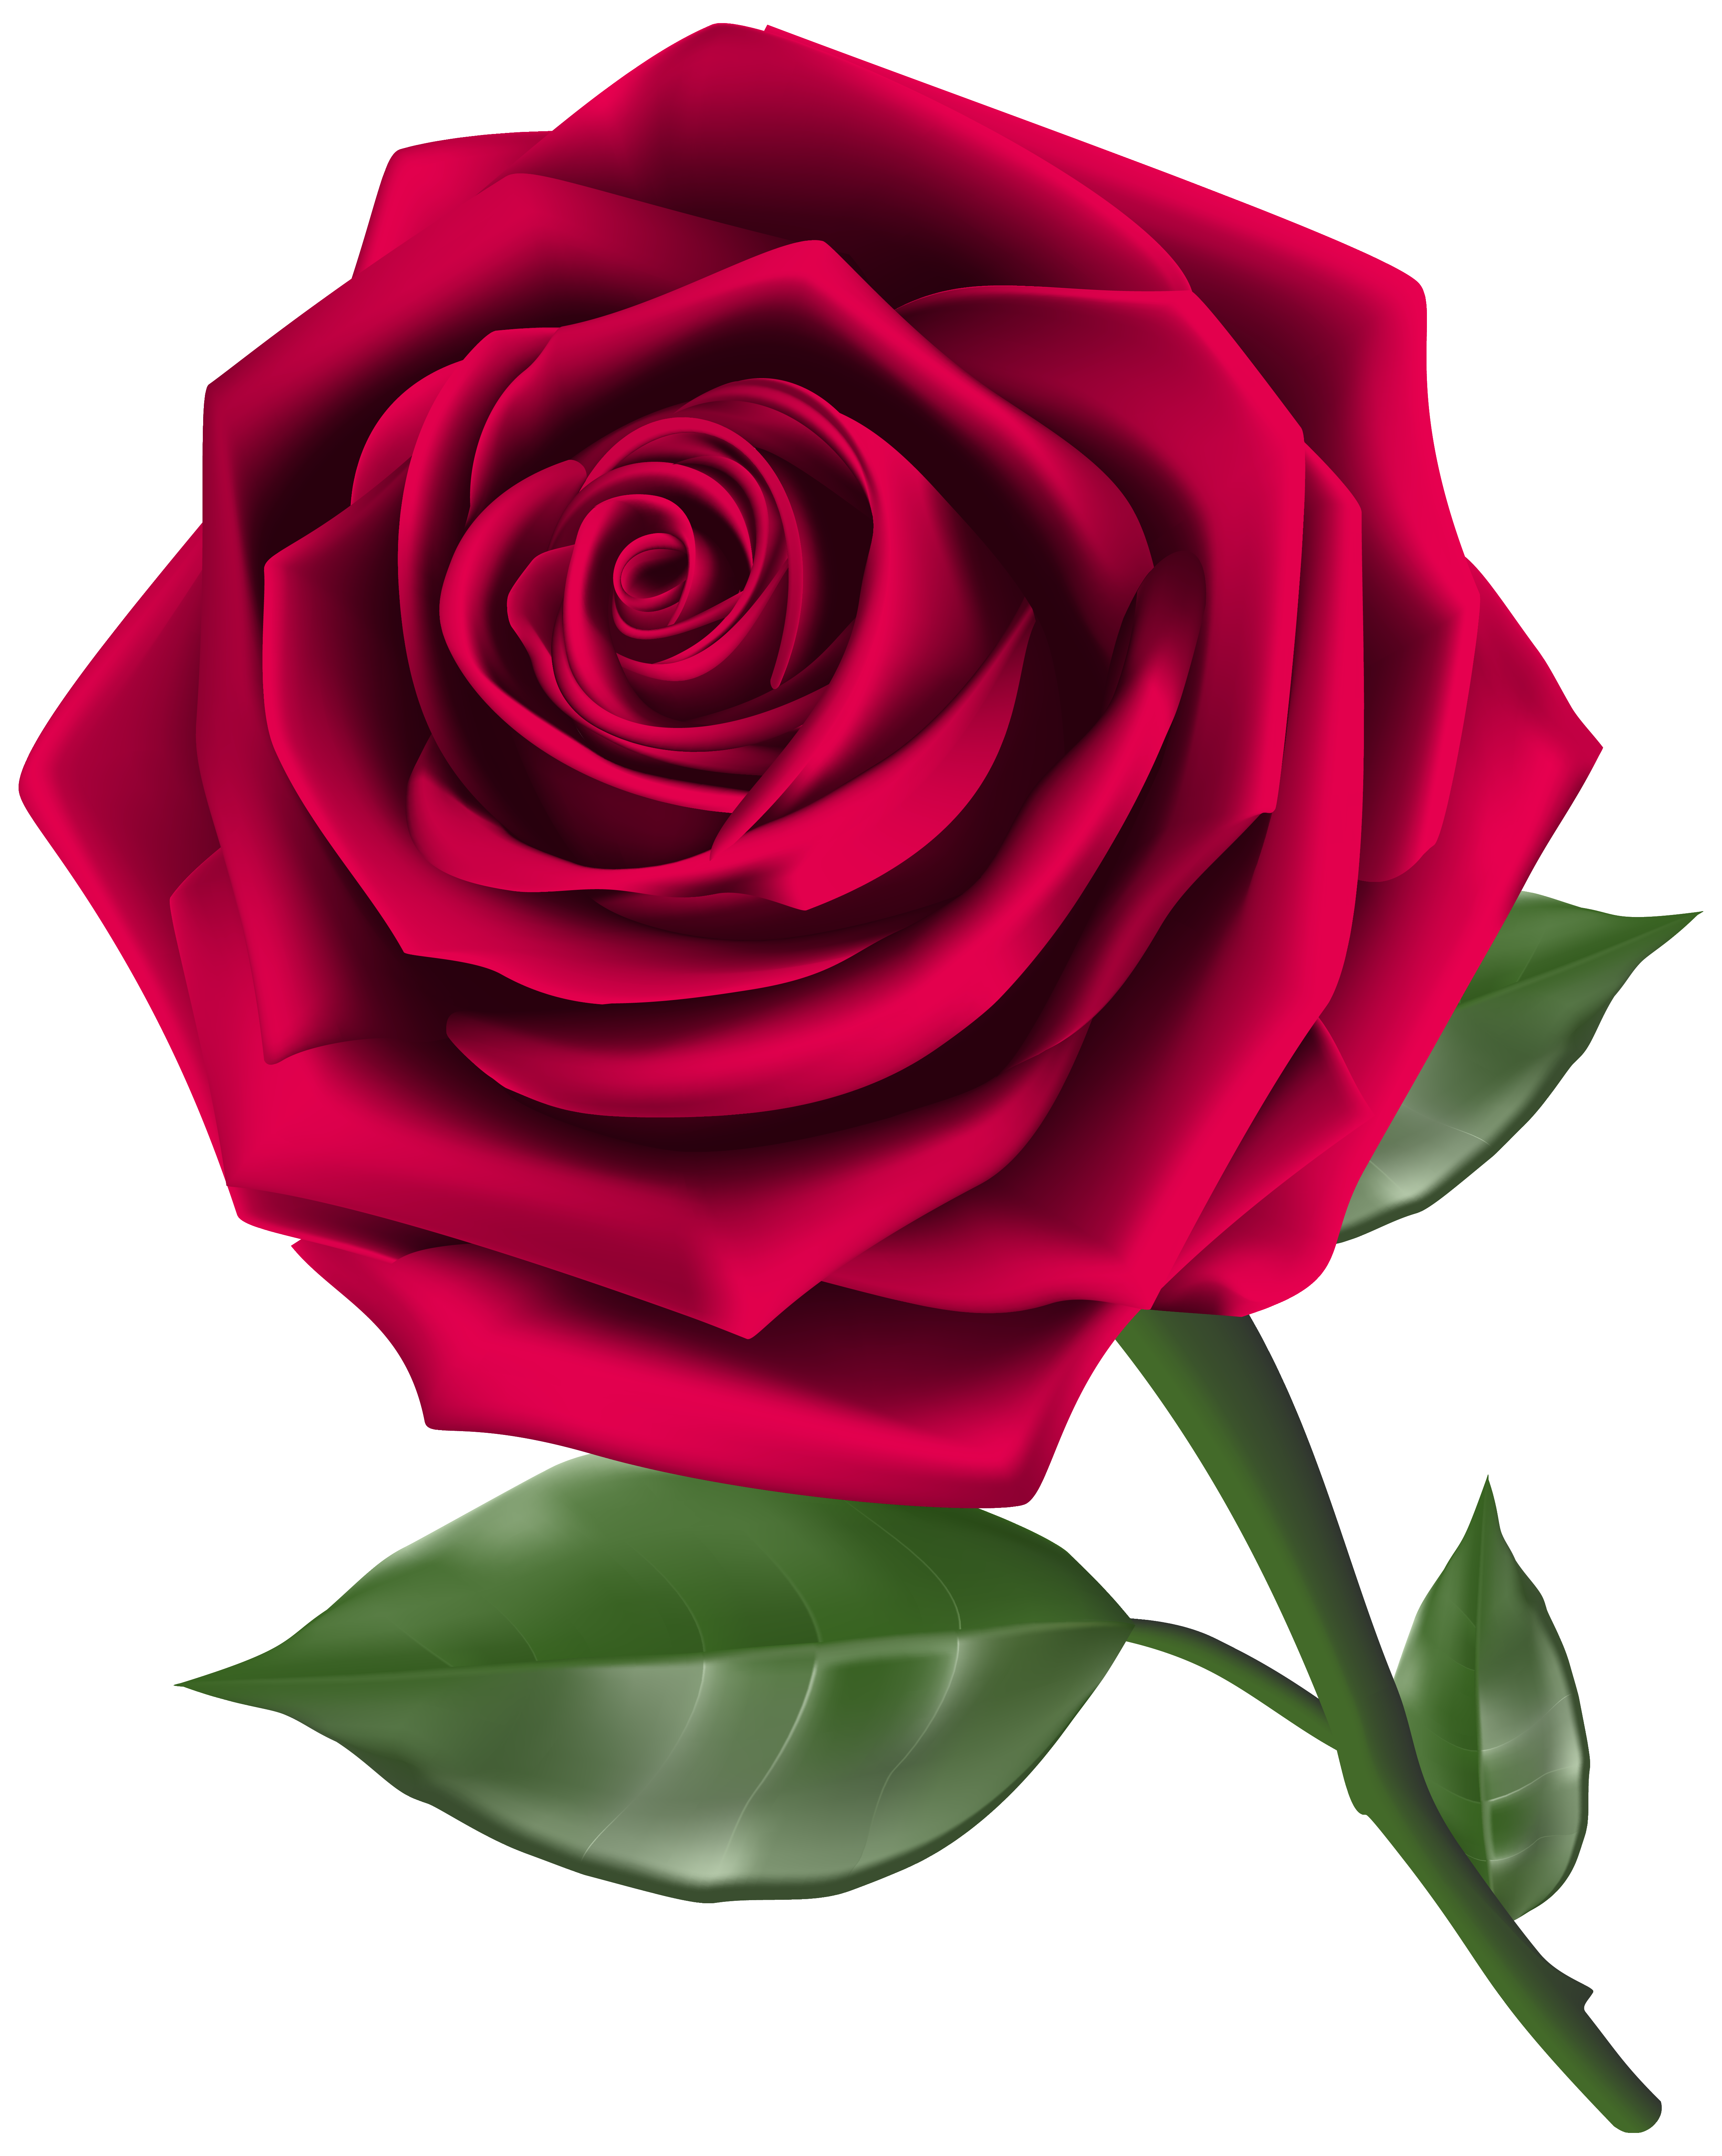 Roses red rose with bud transparent clip art picture - Clipartix